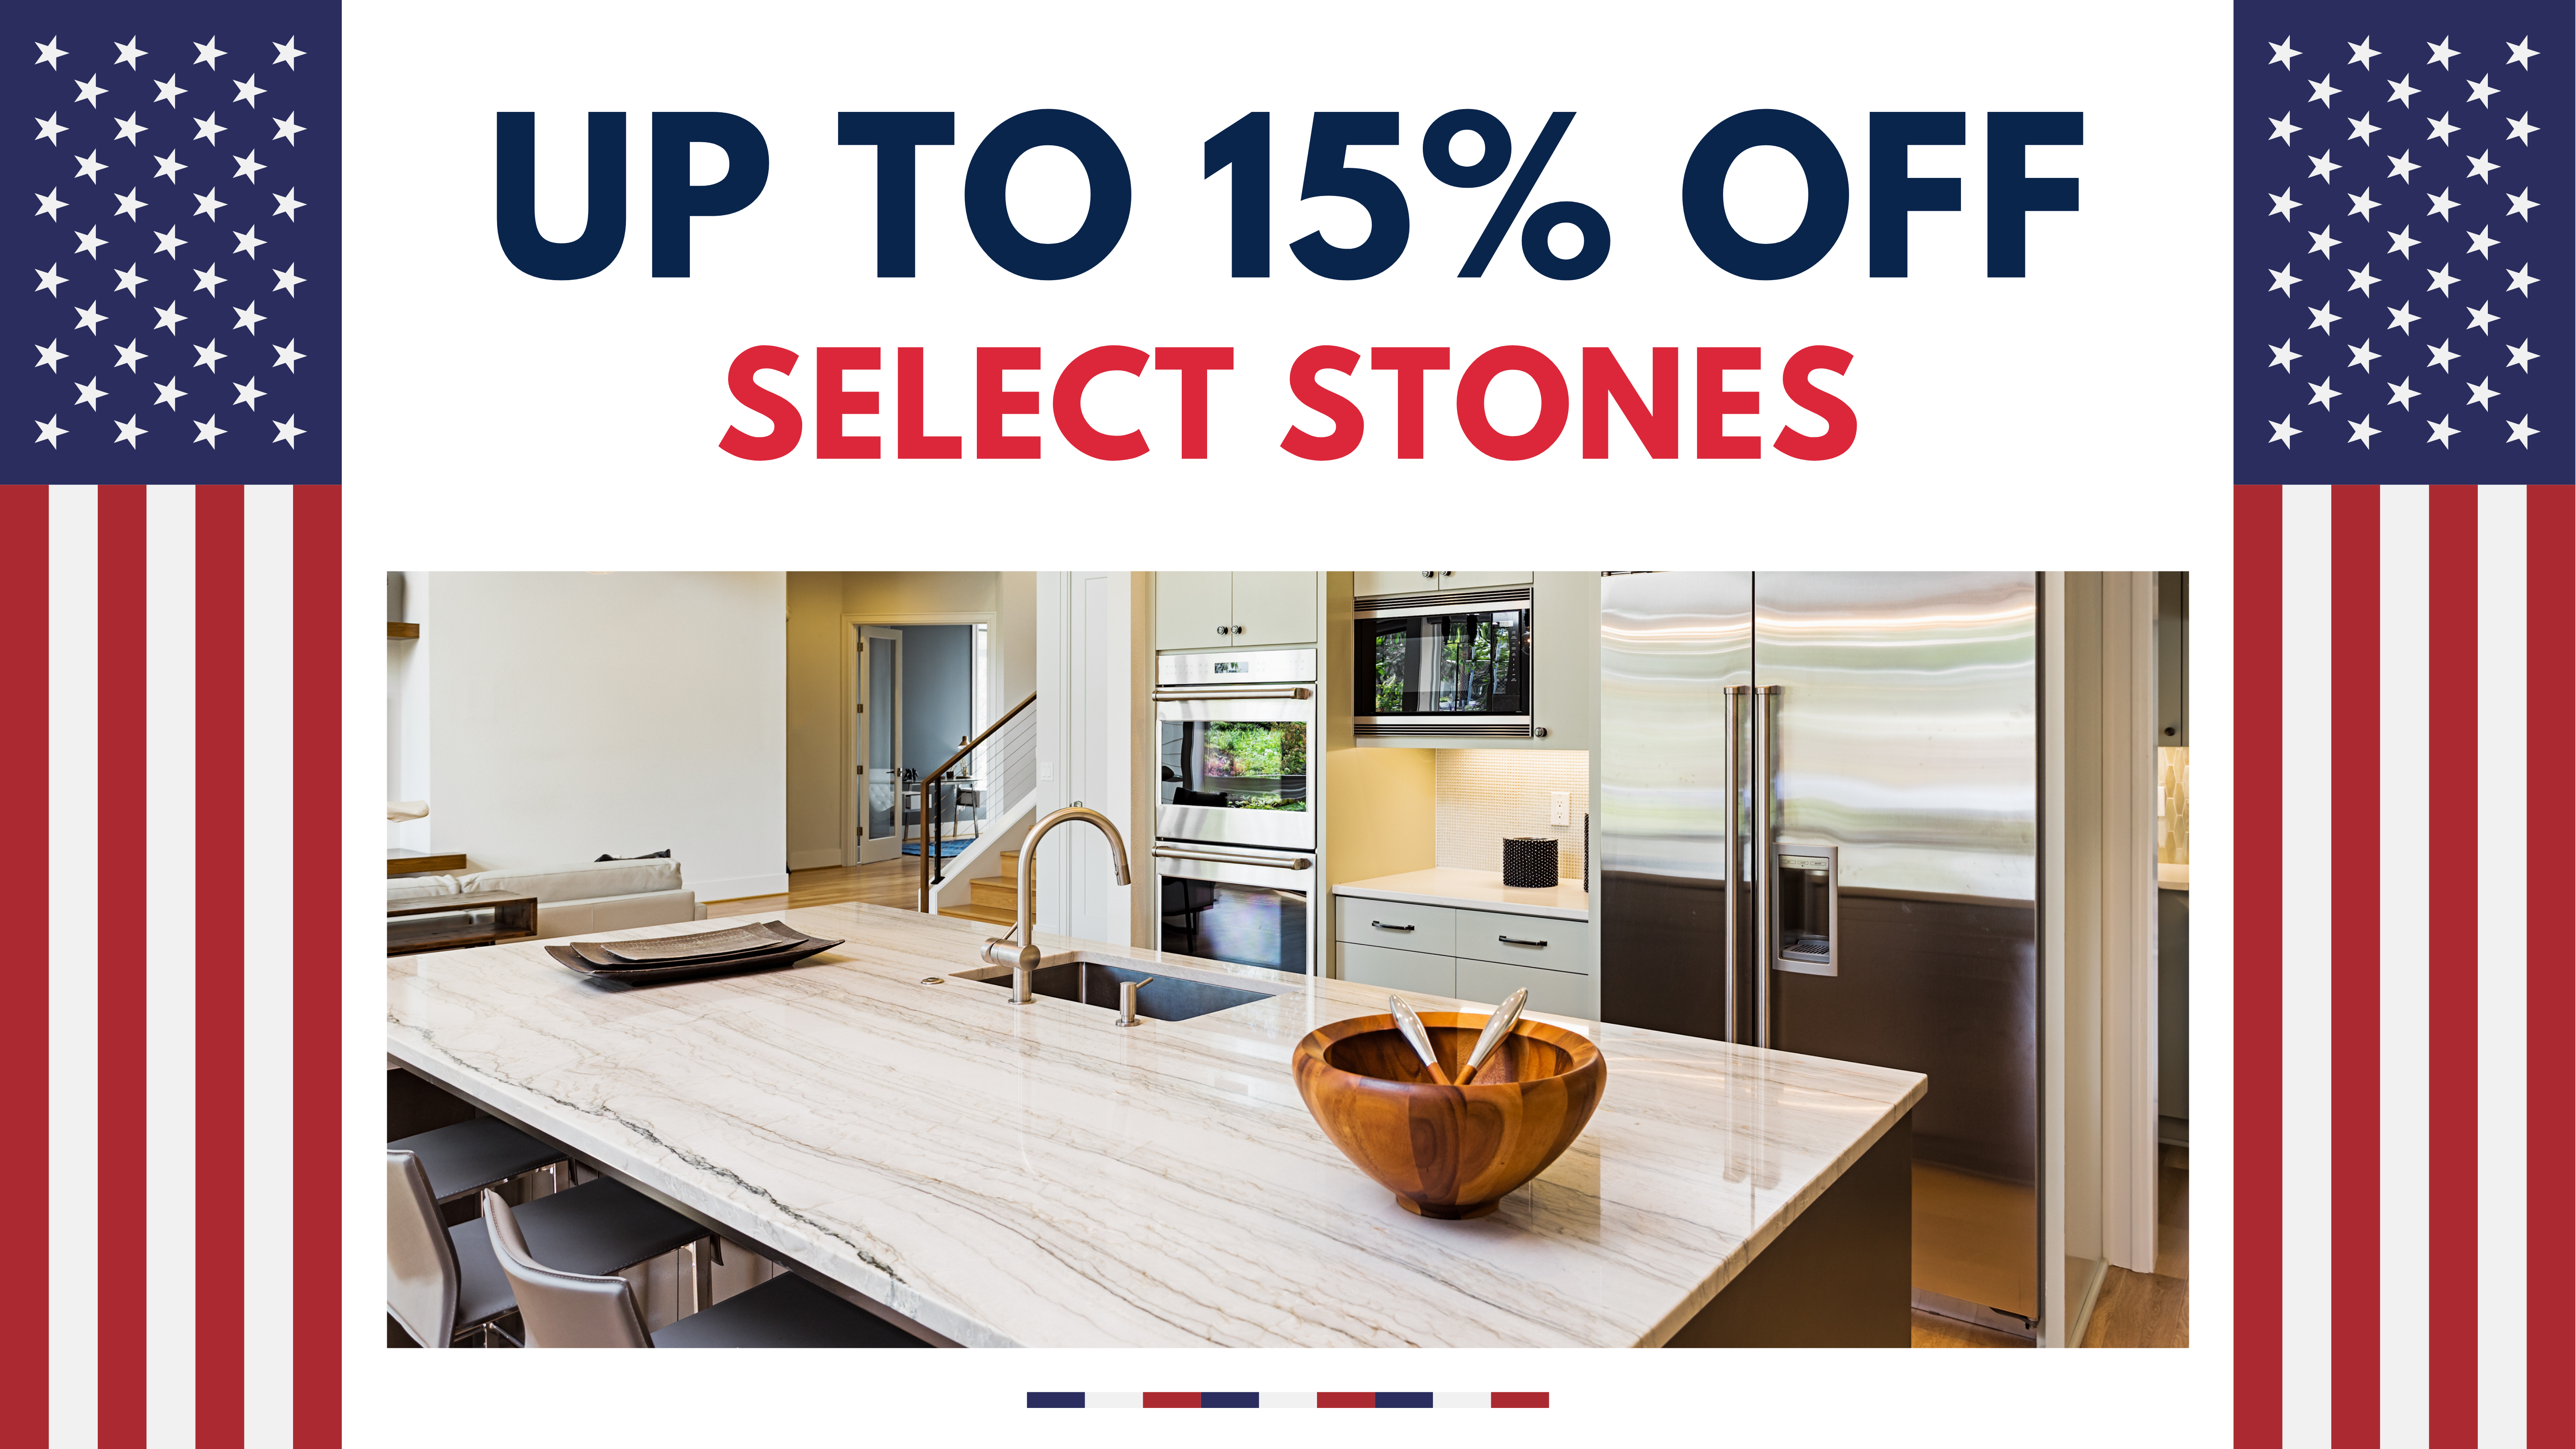 Birmingham - YouTube Cover - Up To 15% OFF Select Stones